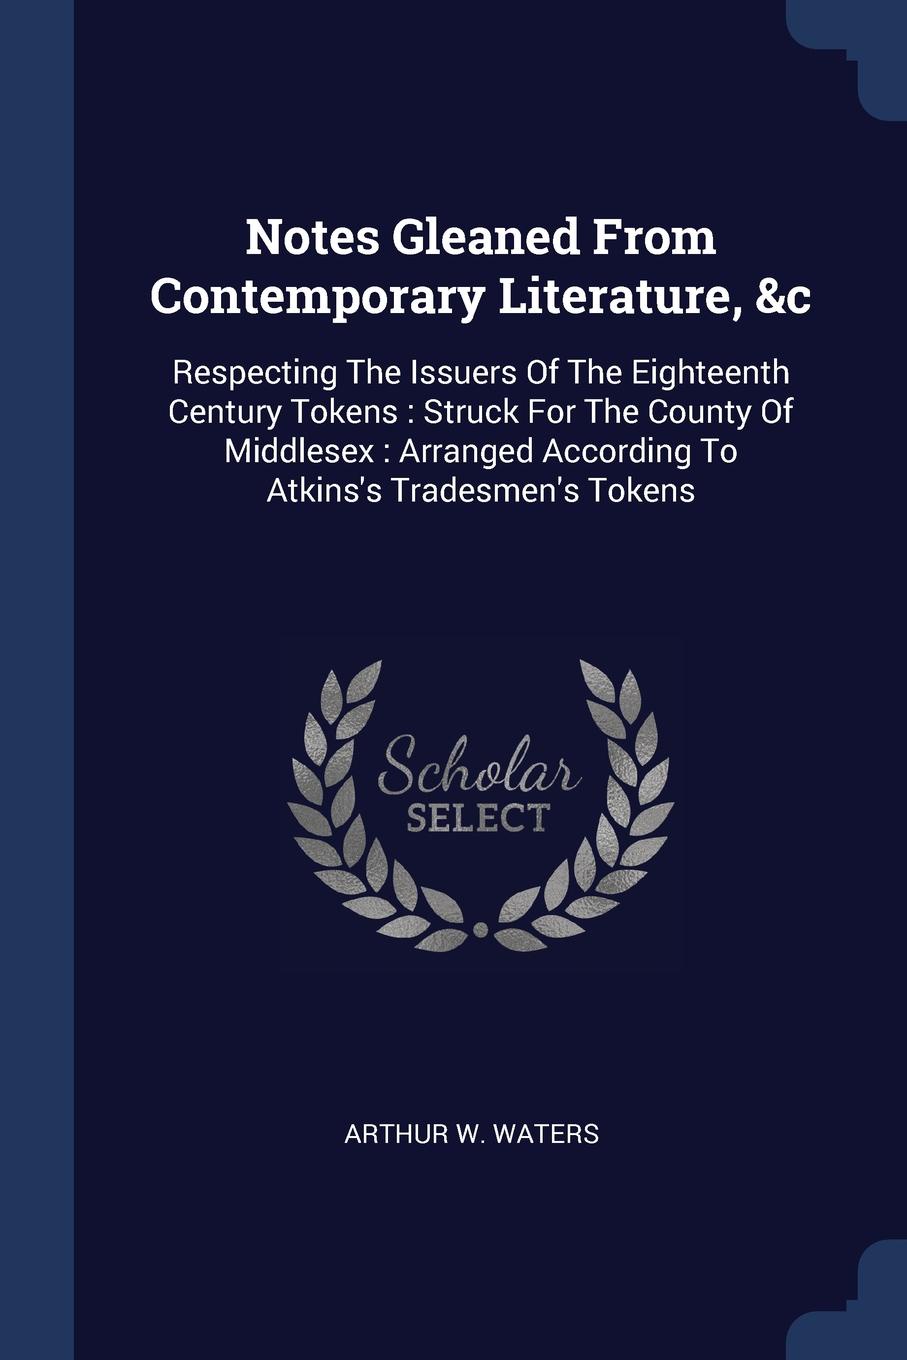 Notes Gleaned From Contemporary Literature, .c. Respecting The Issuers Of The Eighteenth Century Tokens : Struck For The County Of Middlesex : Arranged According To Atkins.s Tradesmen.s Tokens